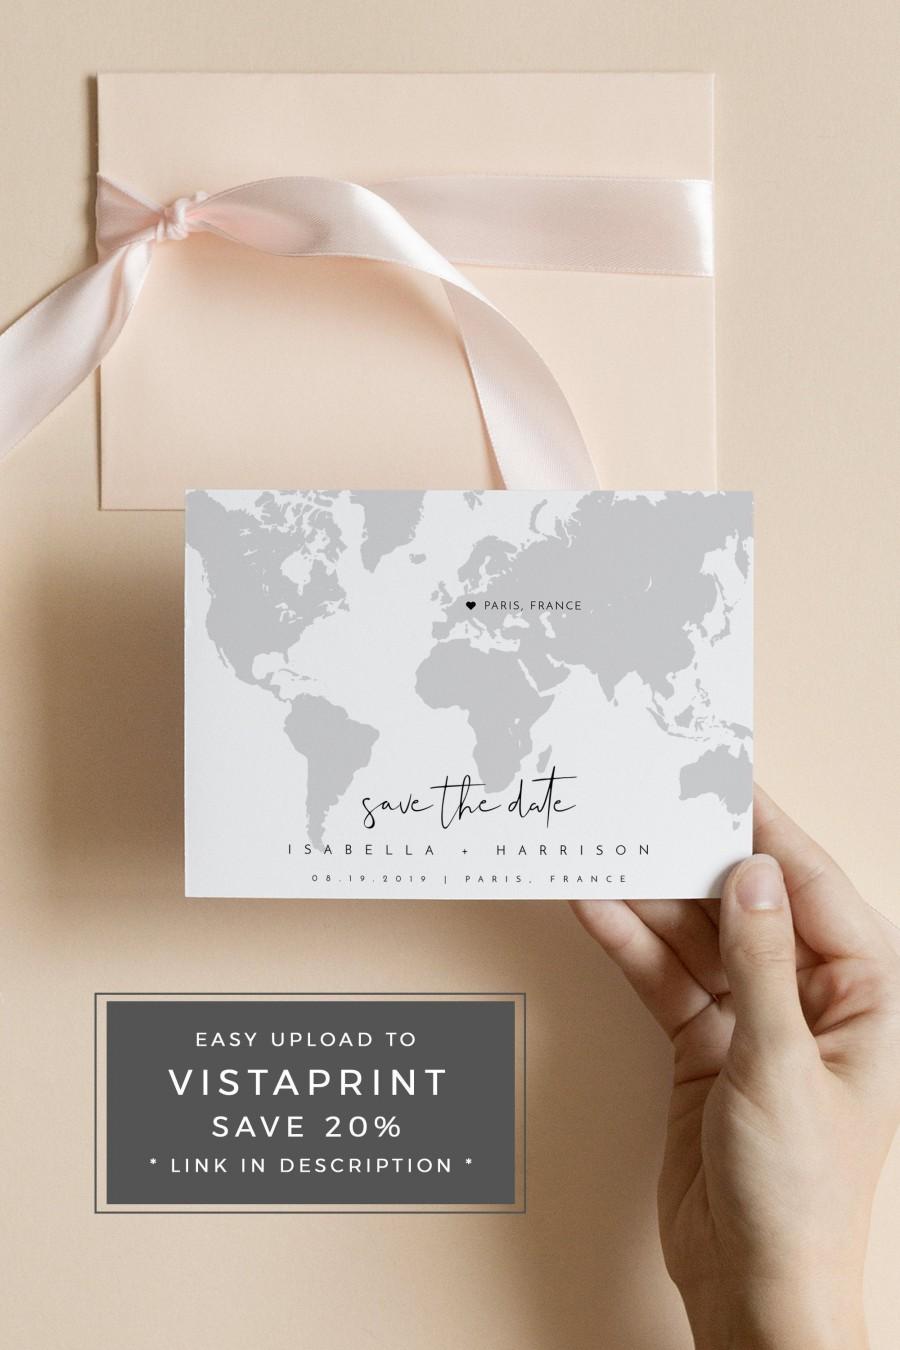 Wedding - Destination Wedding Save the Date Template, Editable Map Save the Date, Map Save the Dates, Travel Save the Date, Templett Invite Instant